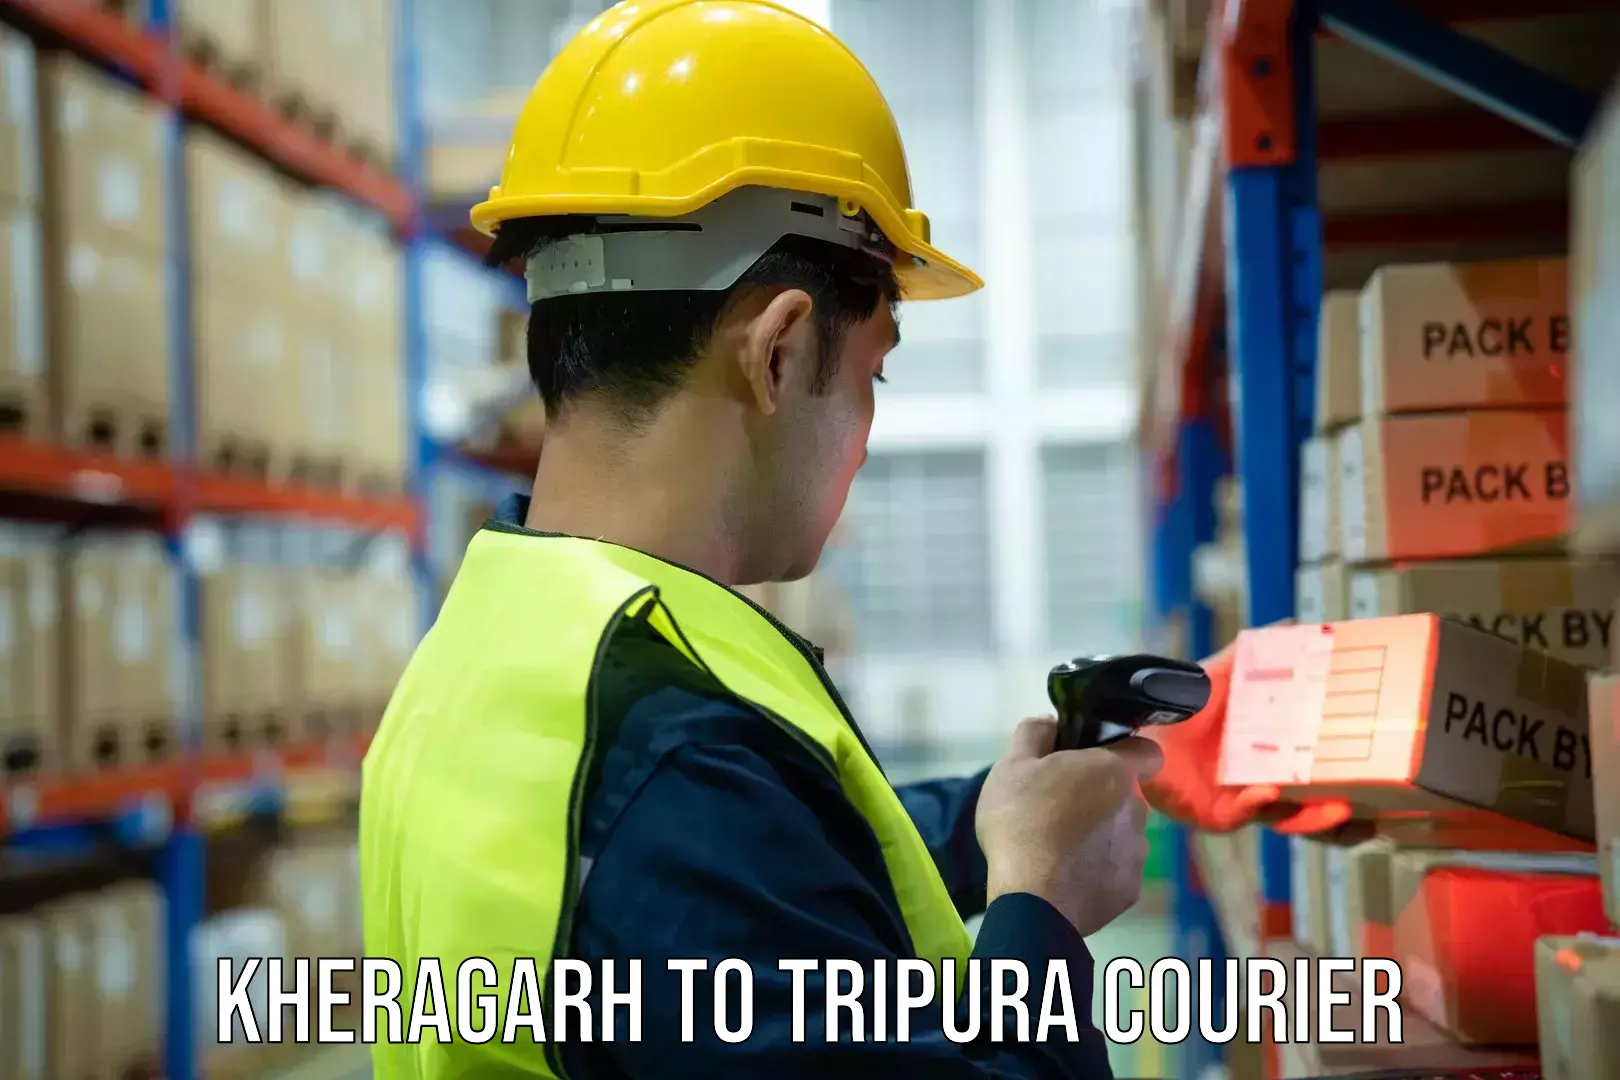 Large-scale shipping solutions Kheragarh to Udaipur Tripura